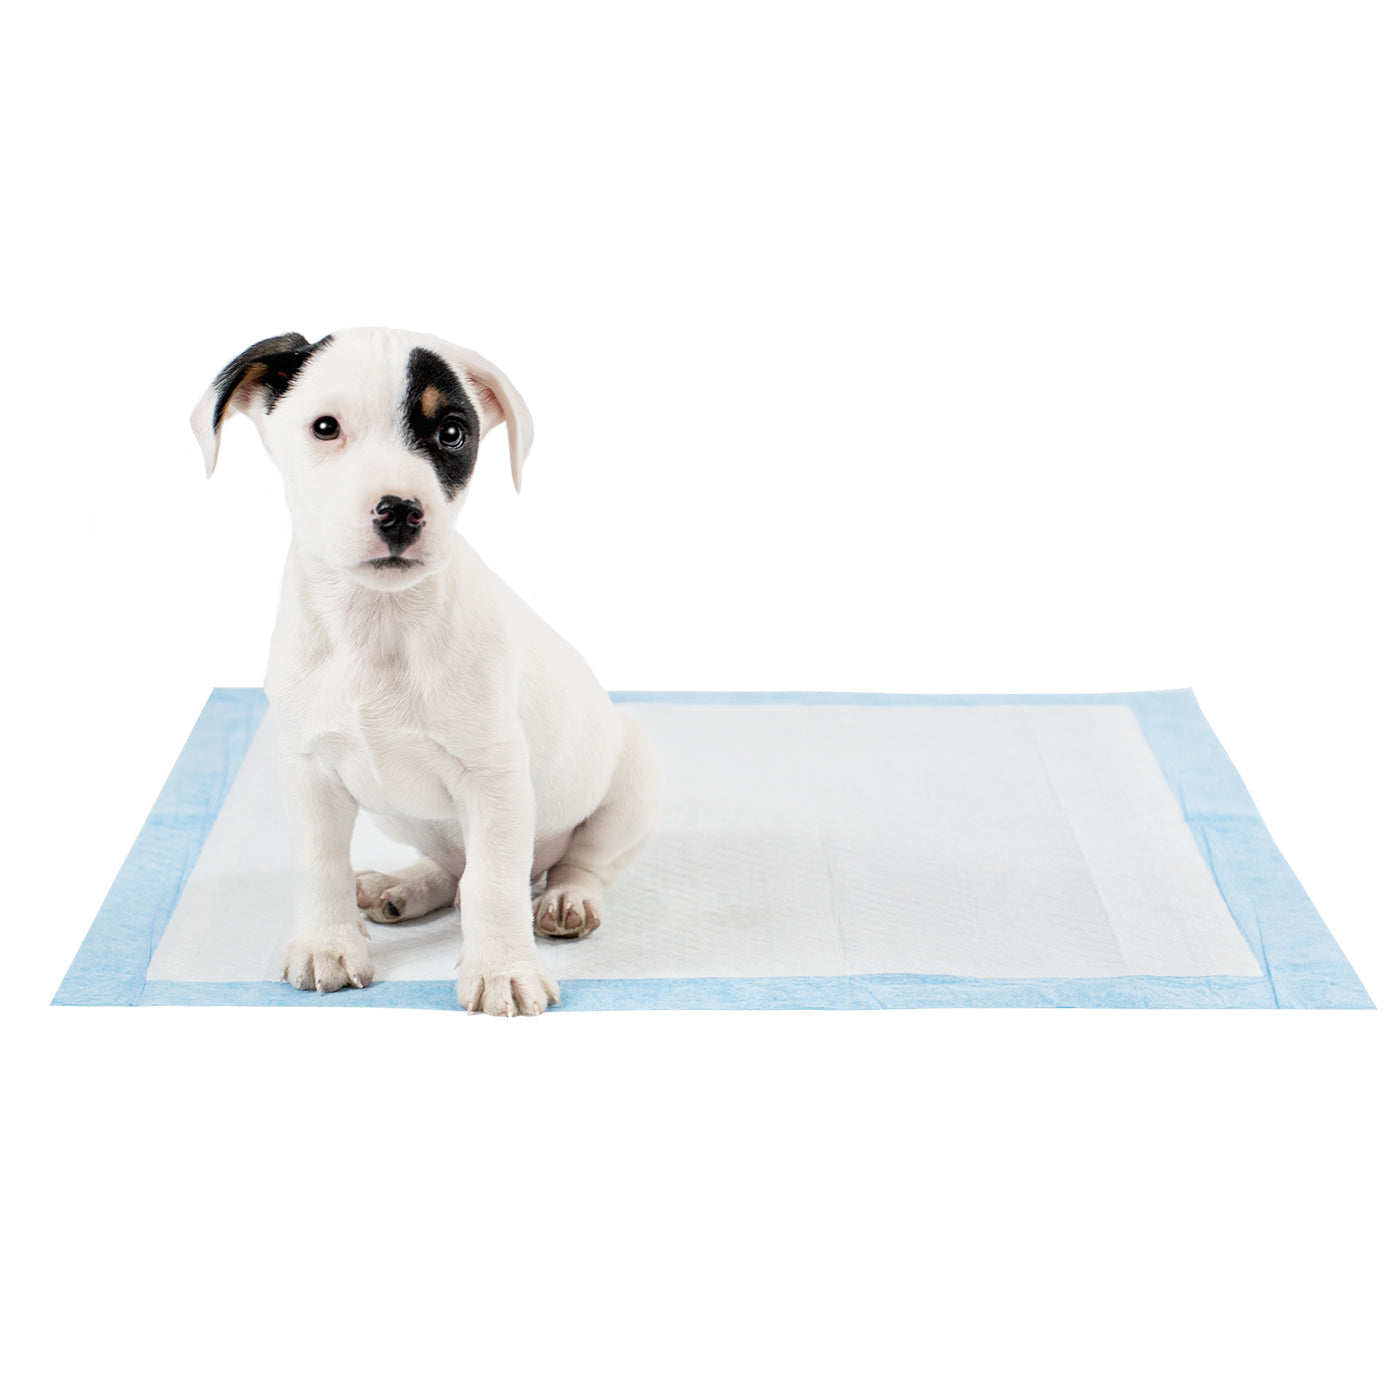 Discover Puppy Training Pads, 150 pads per pack. Featuring Super absorbent with 5 layers absorbency, and Makes house training easy and protects floors. Reducing smelly odours, Perfect for training puppies, travelling, ill or confined dogs. now available at Lords and Labradors US